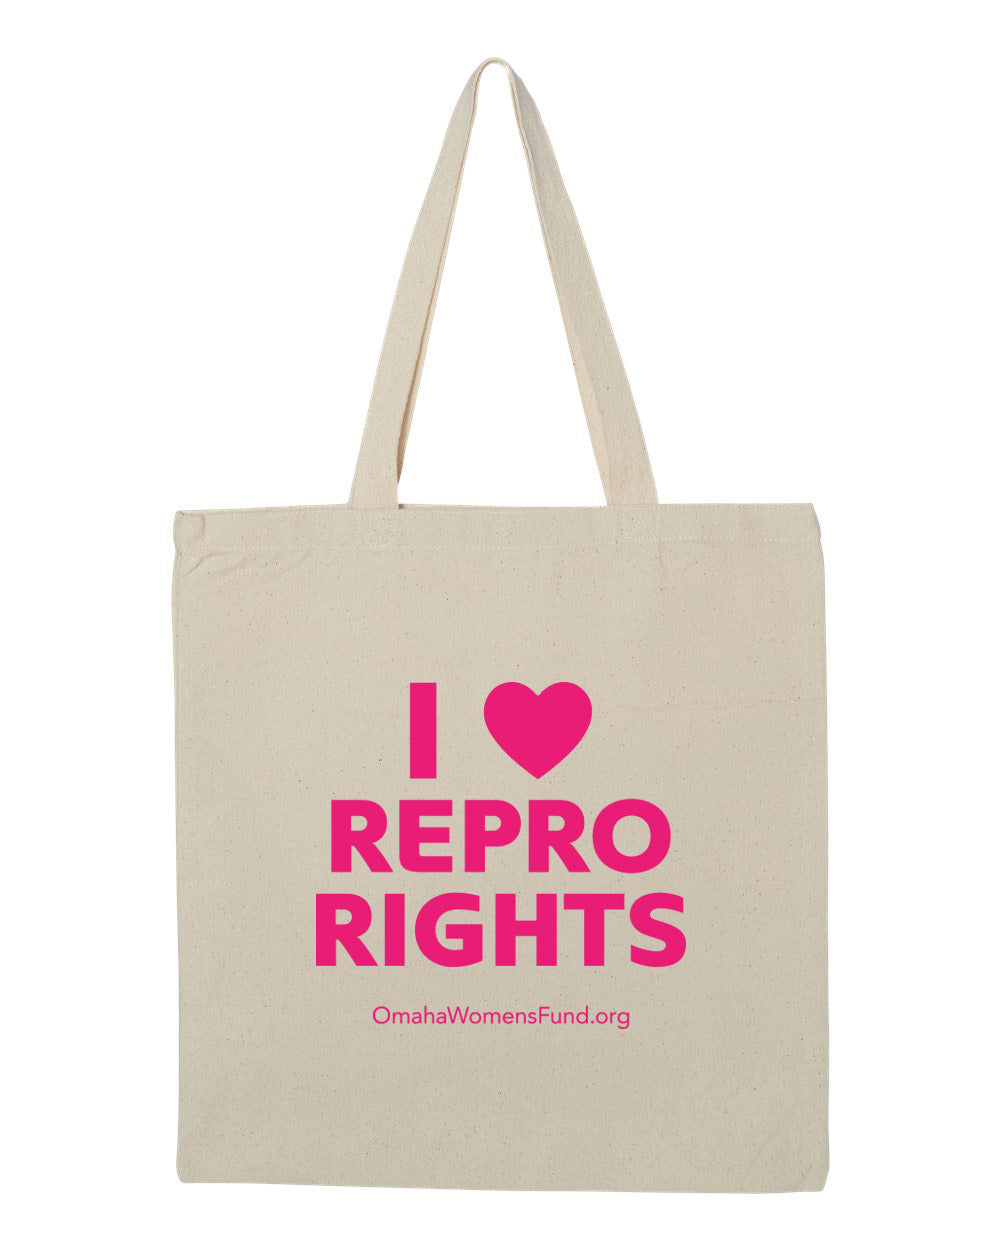 Women's Fund Of Omaha | I Heart Repro Rights Tote